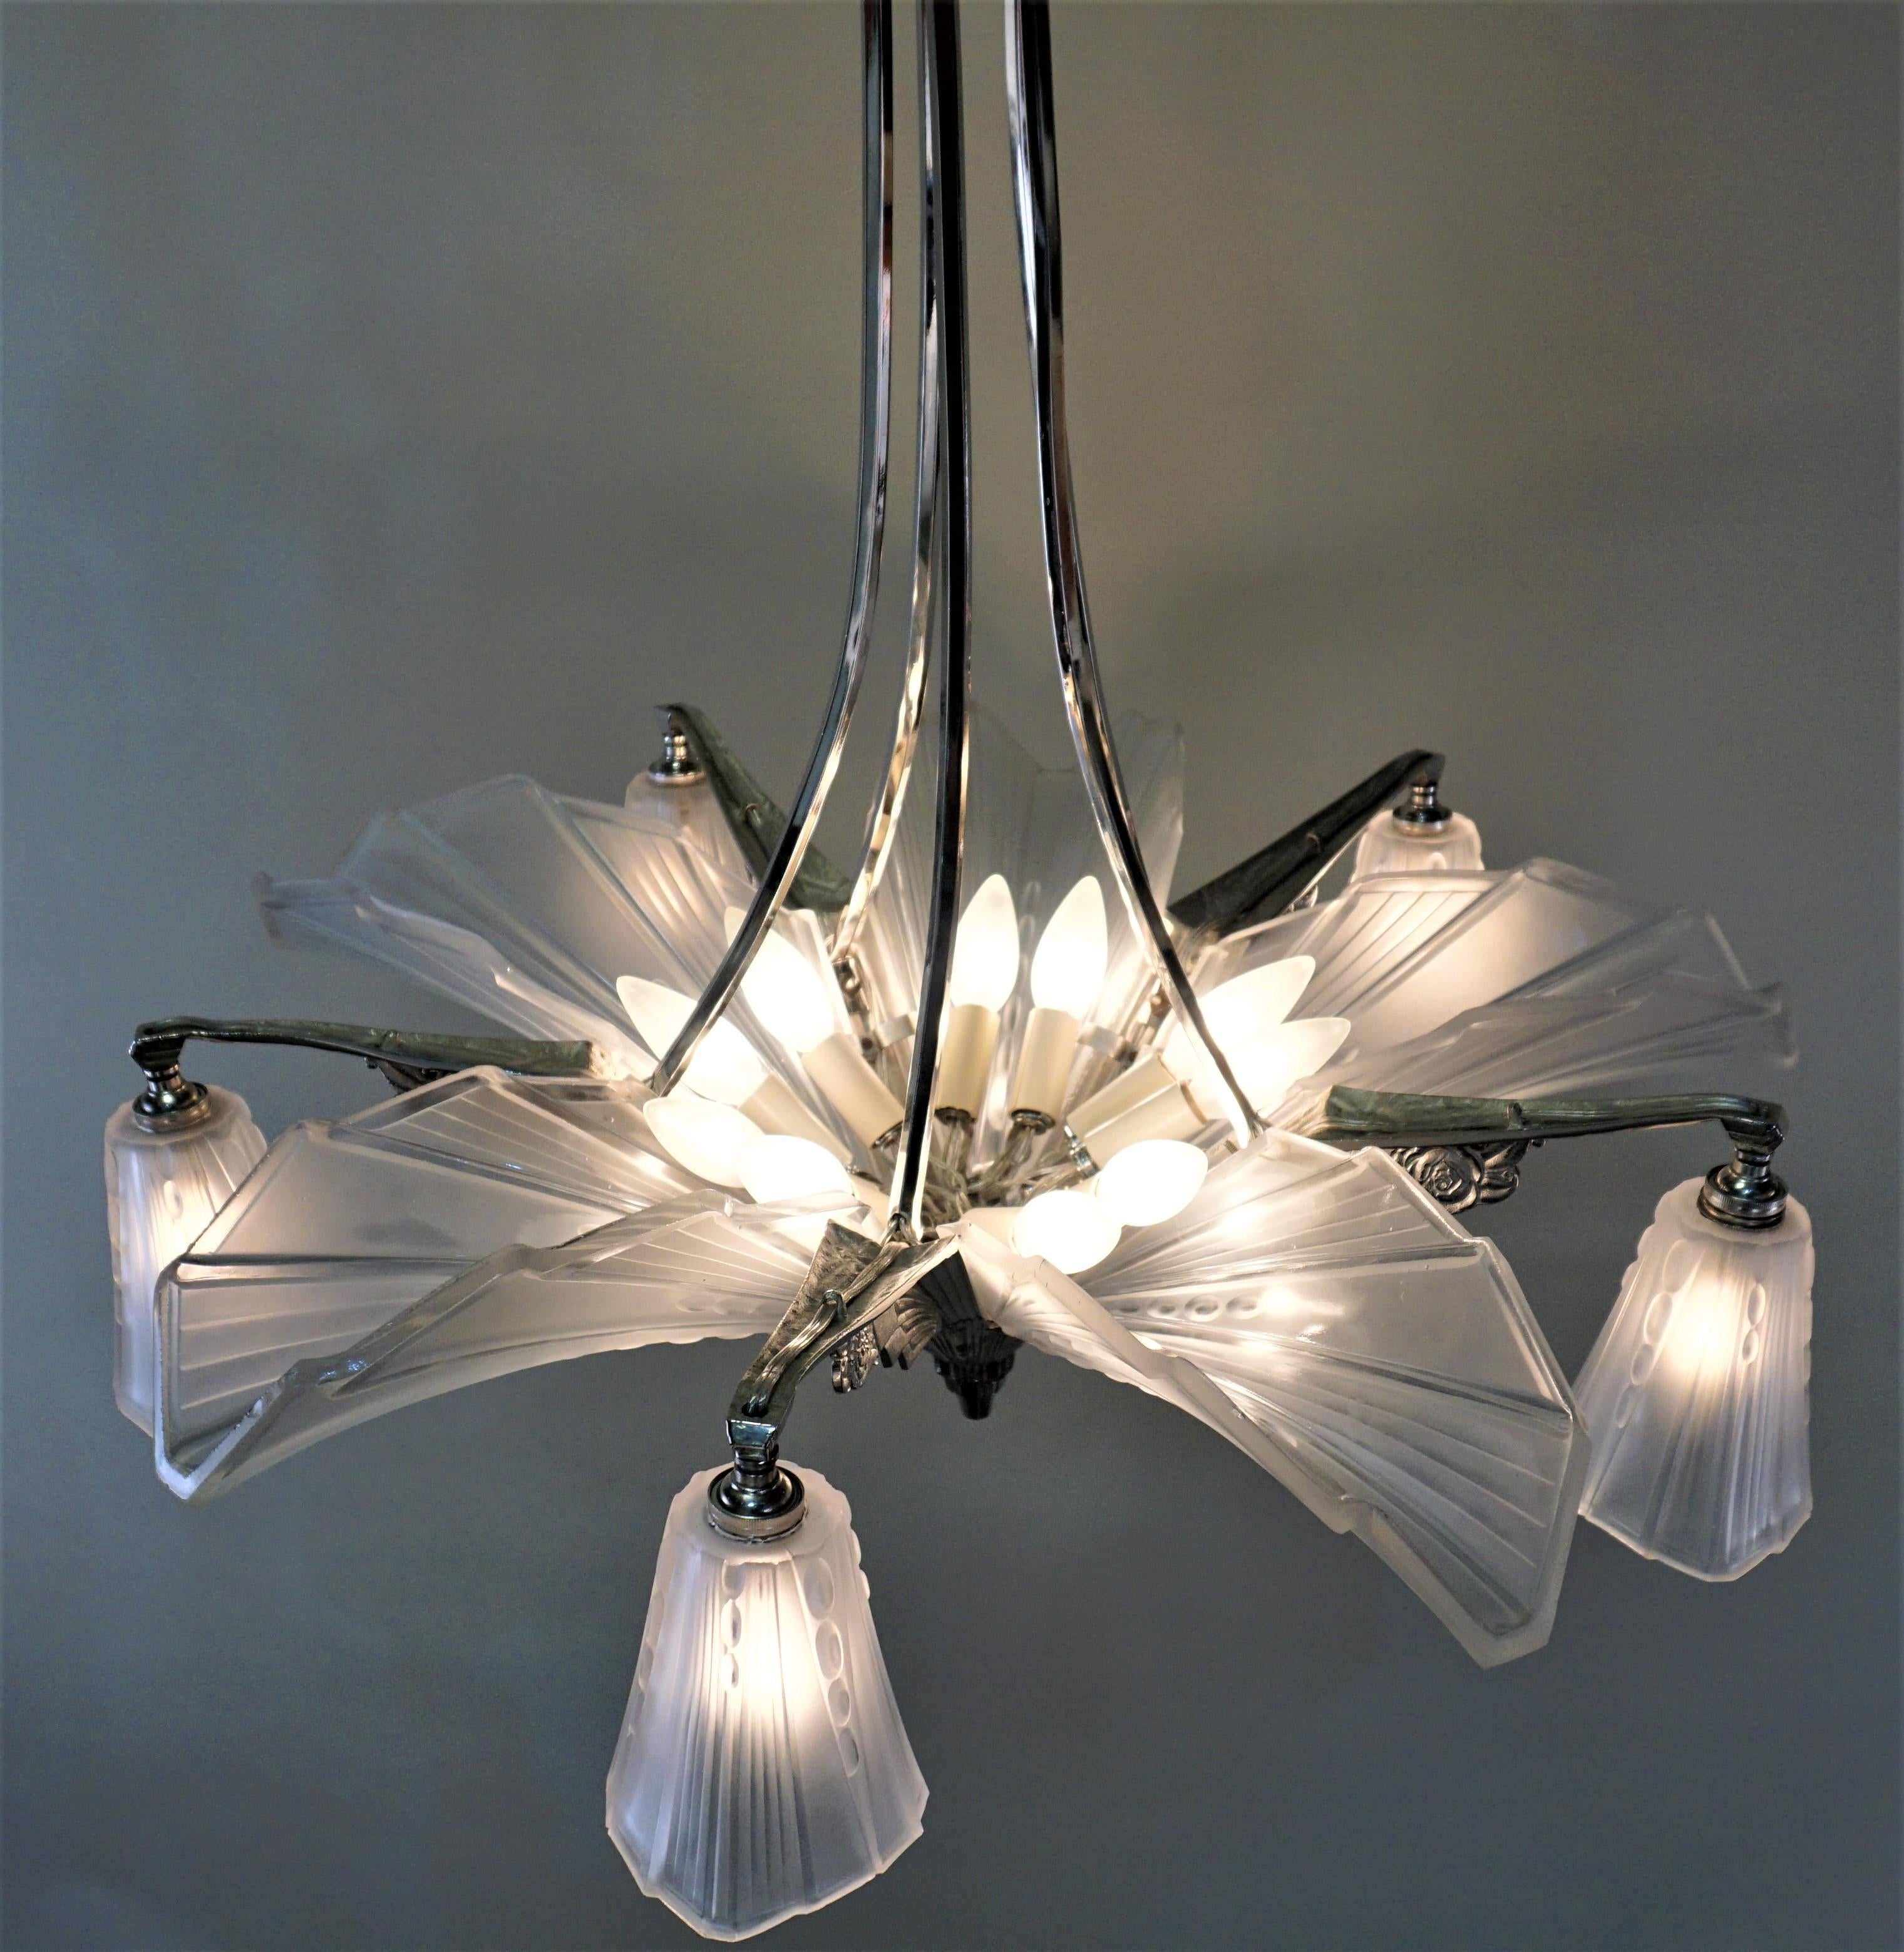 Pair of French Art Deco Chandeliers by Atelier E.J.G 6